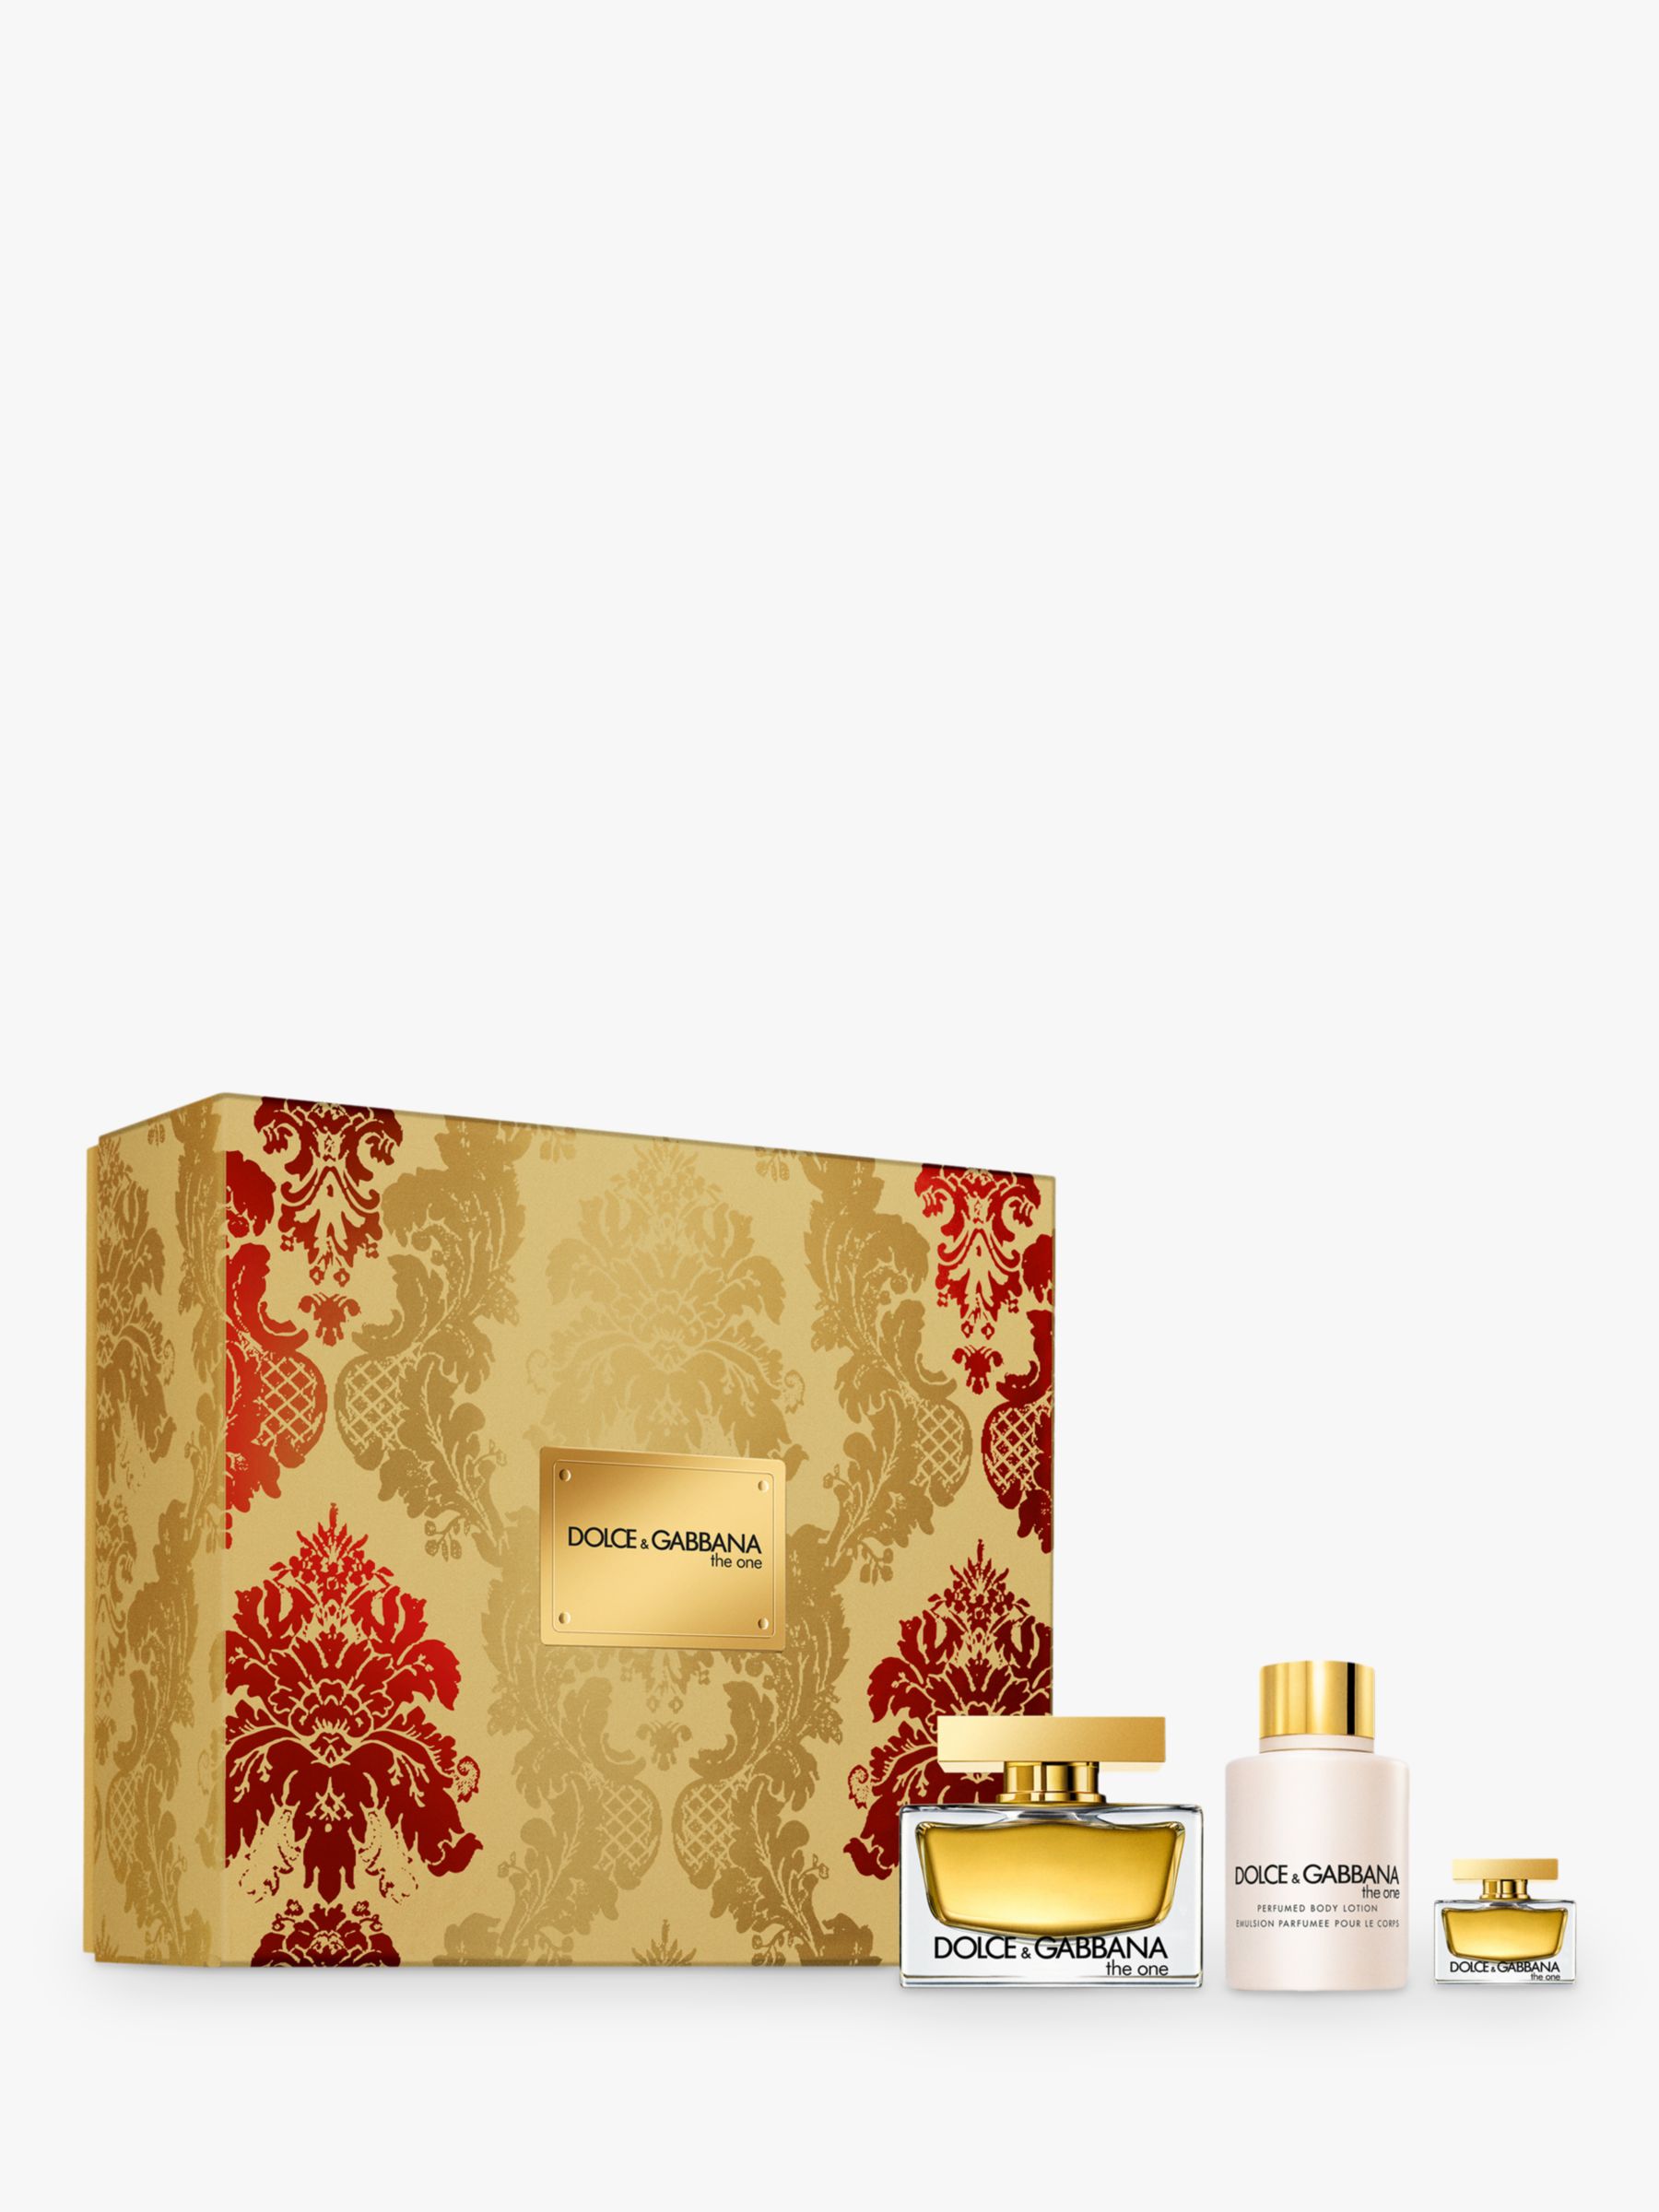 dolce and gabbana the one 50ml gift set